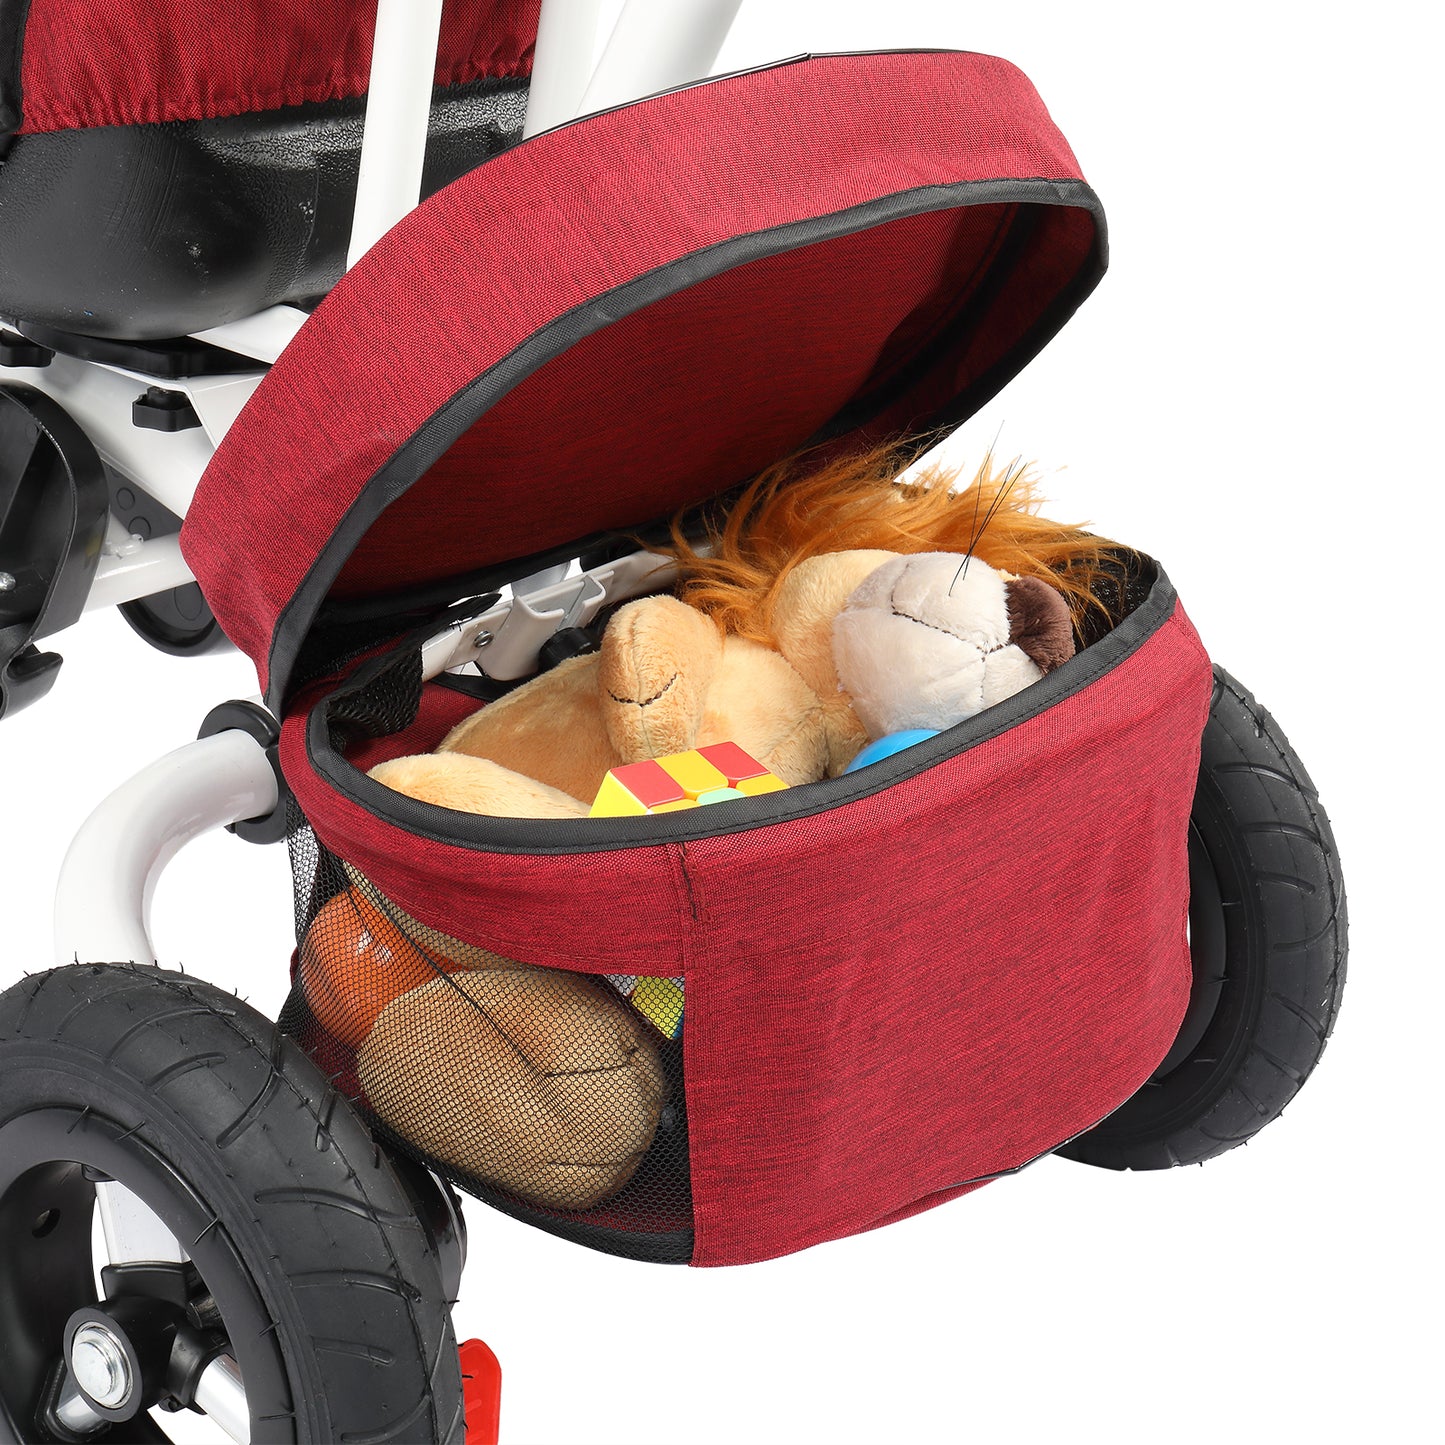 Kids Tricycle, Kids Folding Steer Stroller with Rotatable Seat